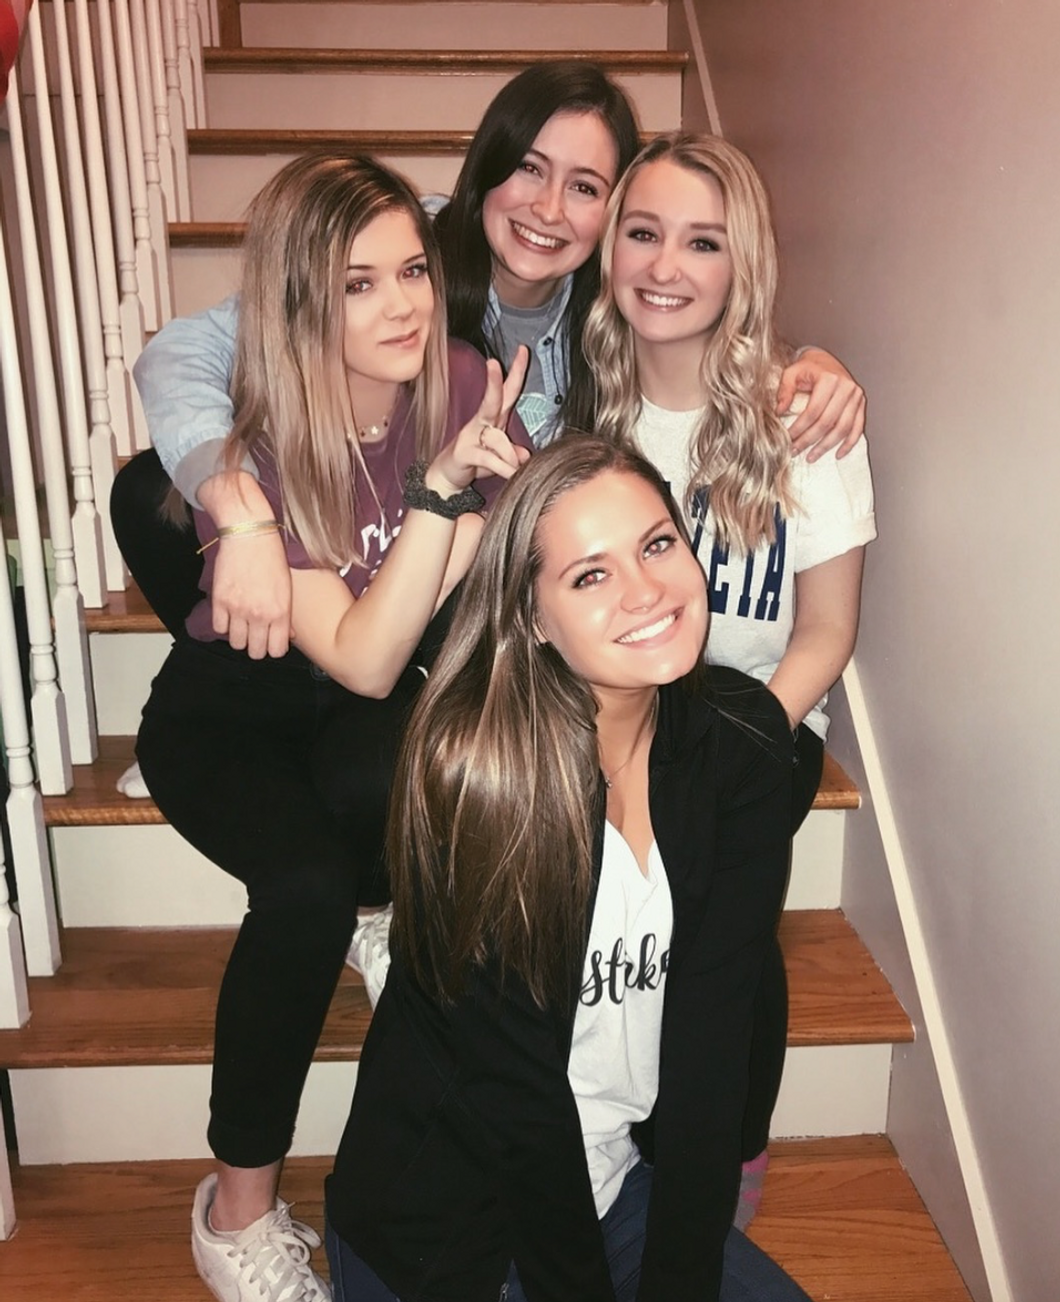 10 Things I've Learned About Sororities Since Joining One